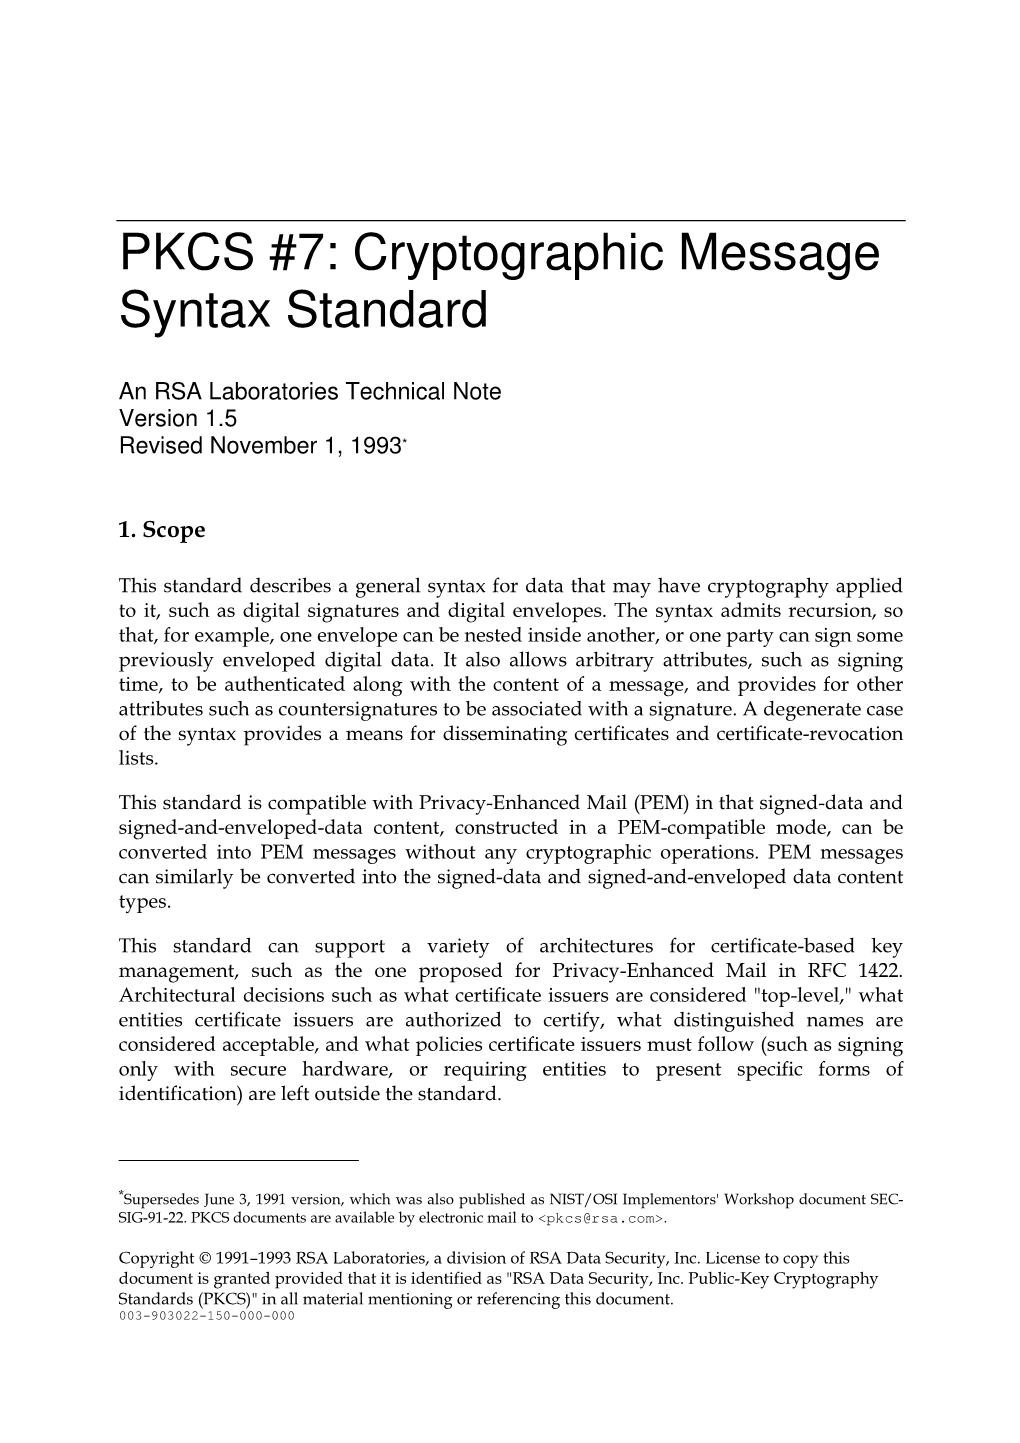 PKCS #7: Cryptographic Message Syntax Standard